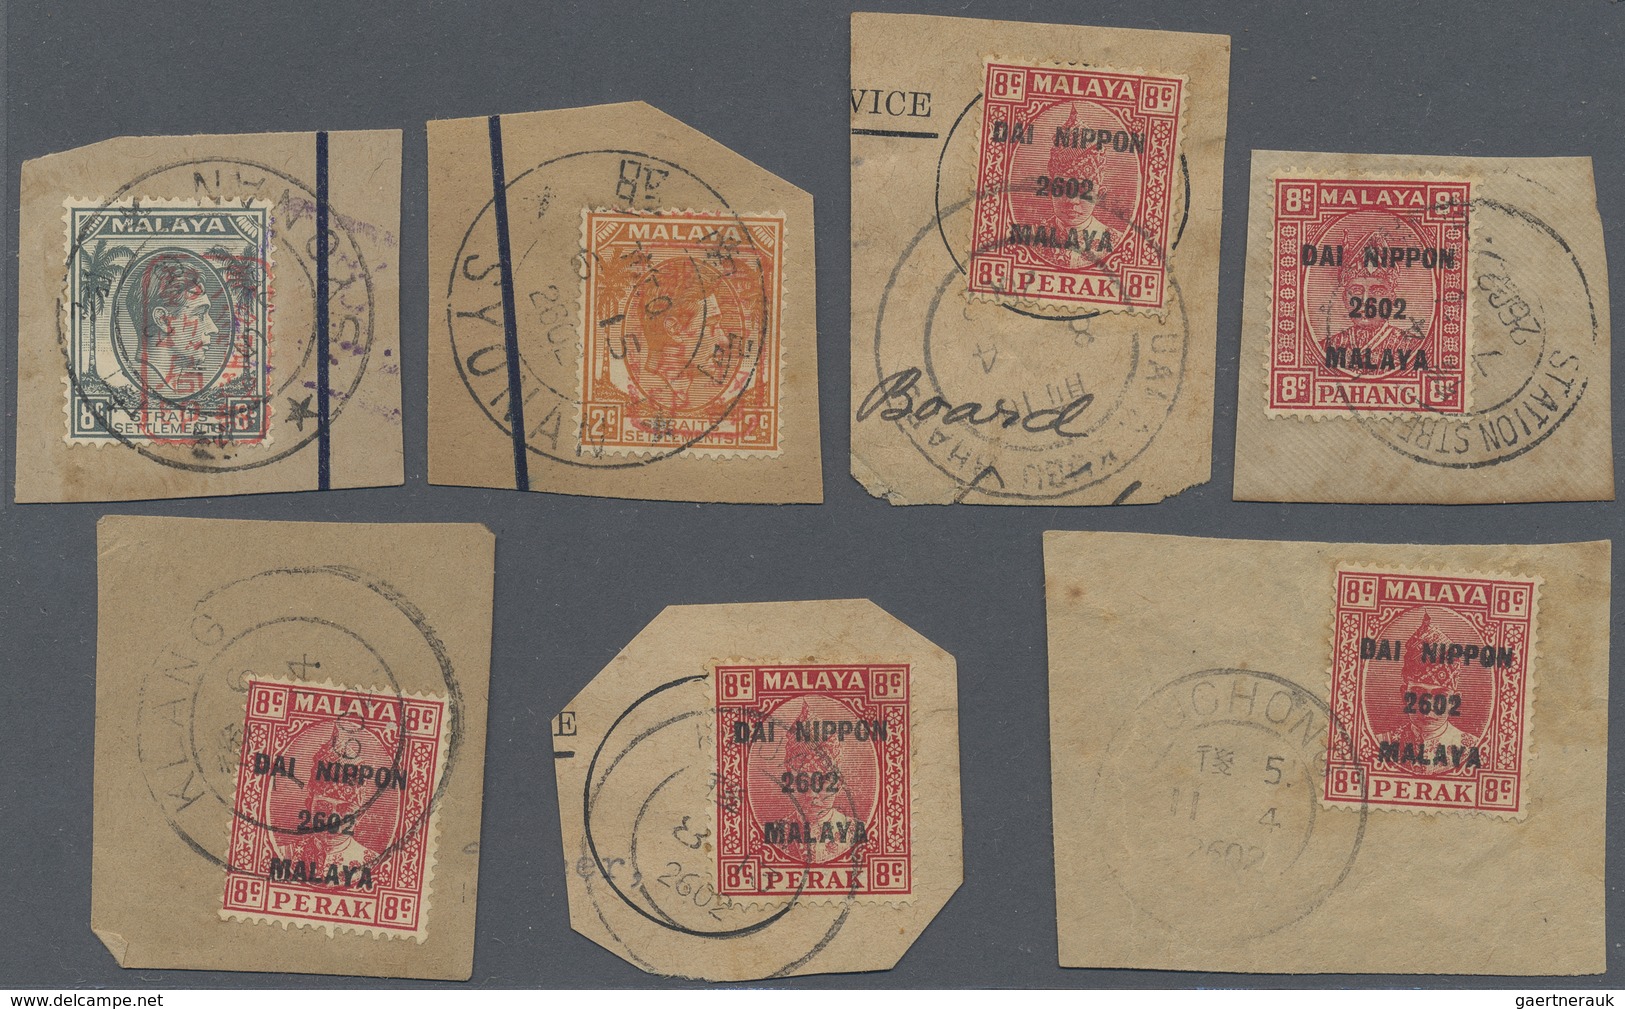 Br/O/Brfst Japanische Besetzung  WK II - Malaya: 1942/45, covers (12, some in mixed condition), 4 C. stationery